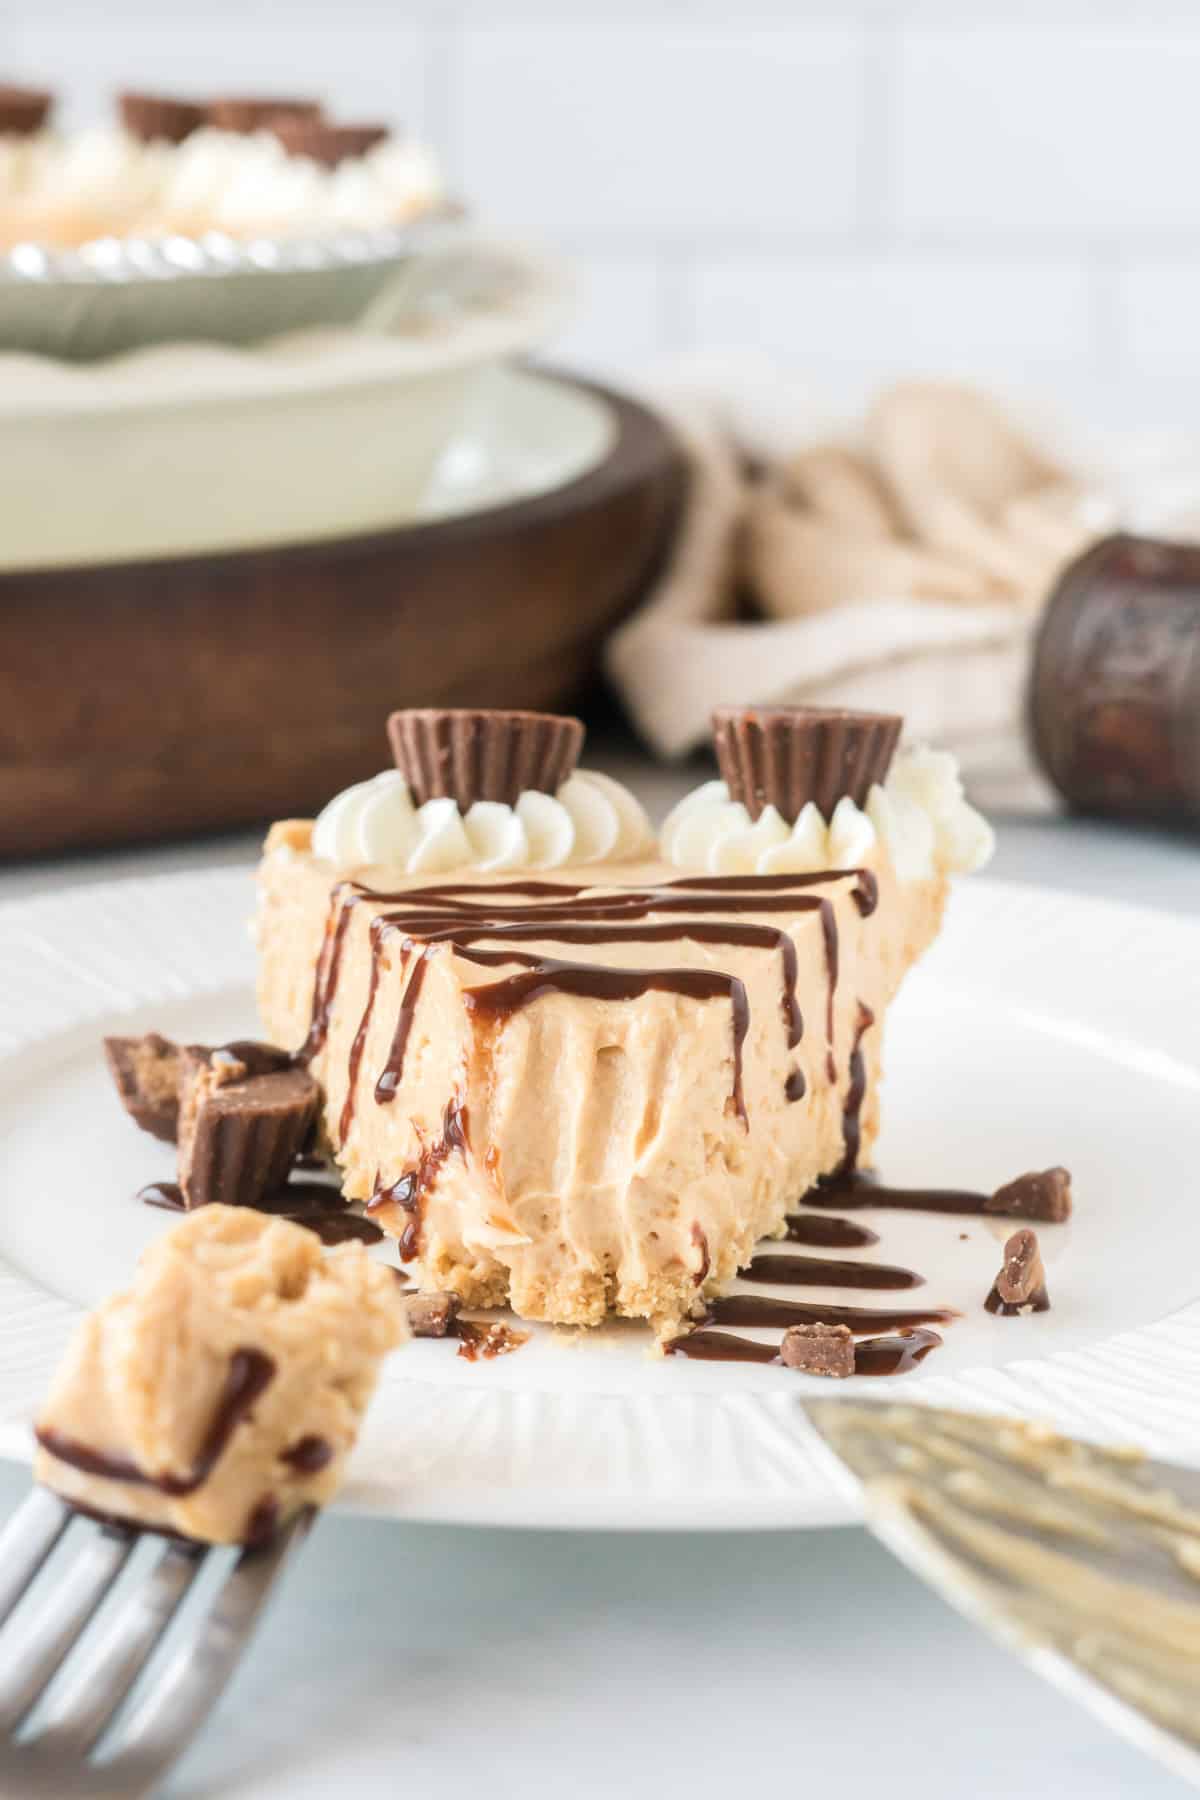 peanut butter pie slice on a plate drizzled with chocolate with a bite taken out